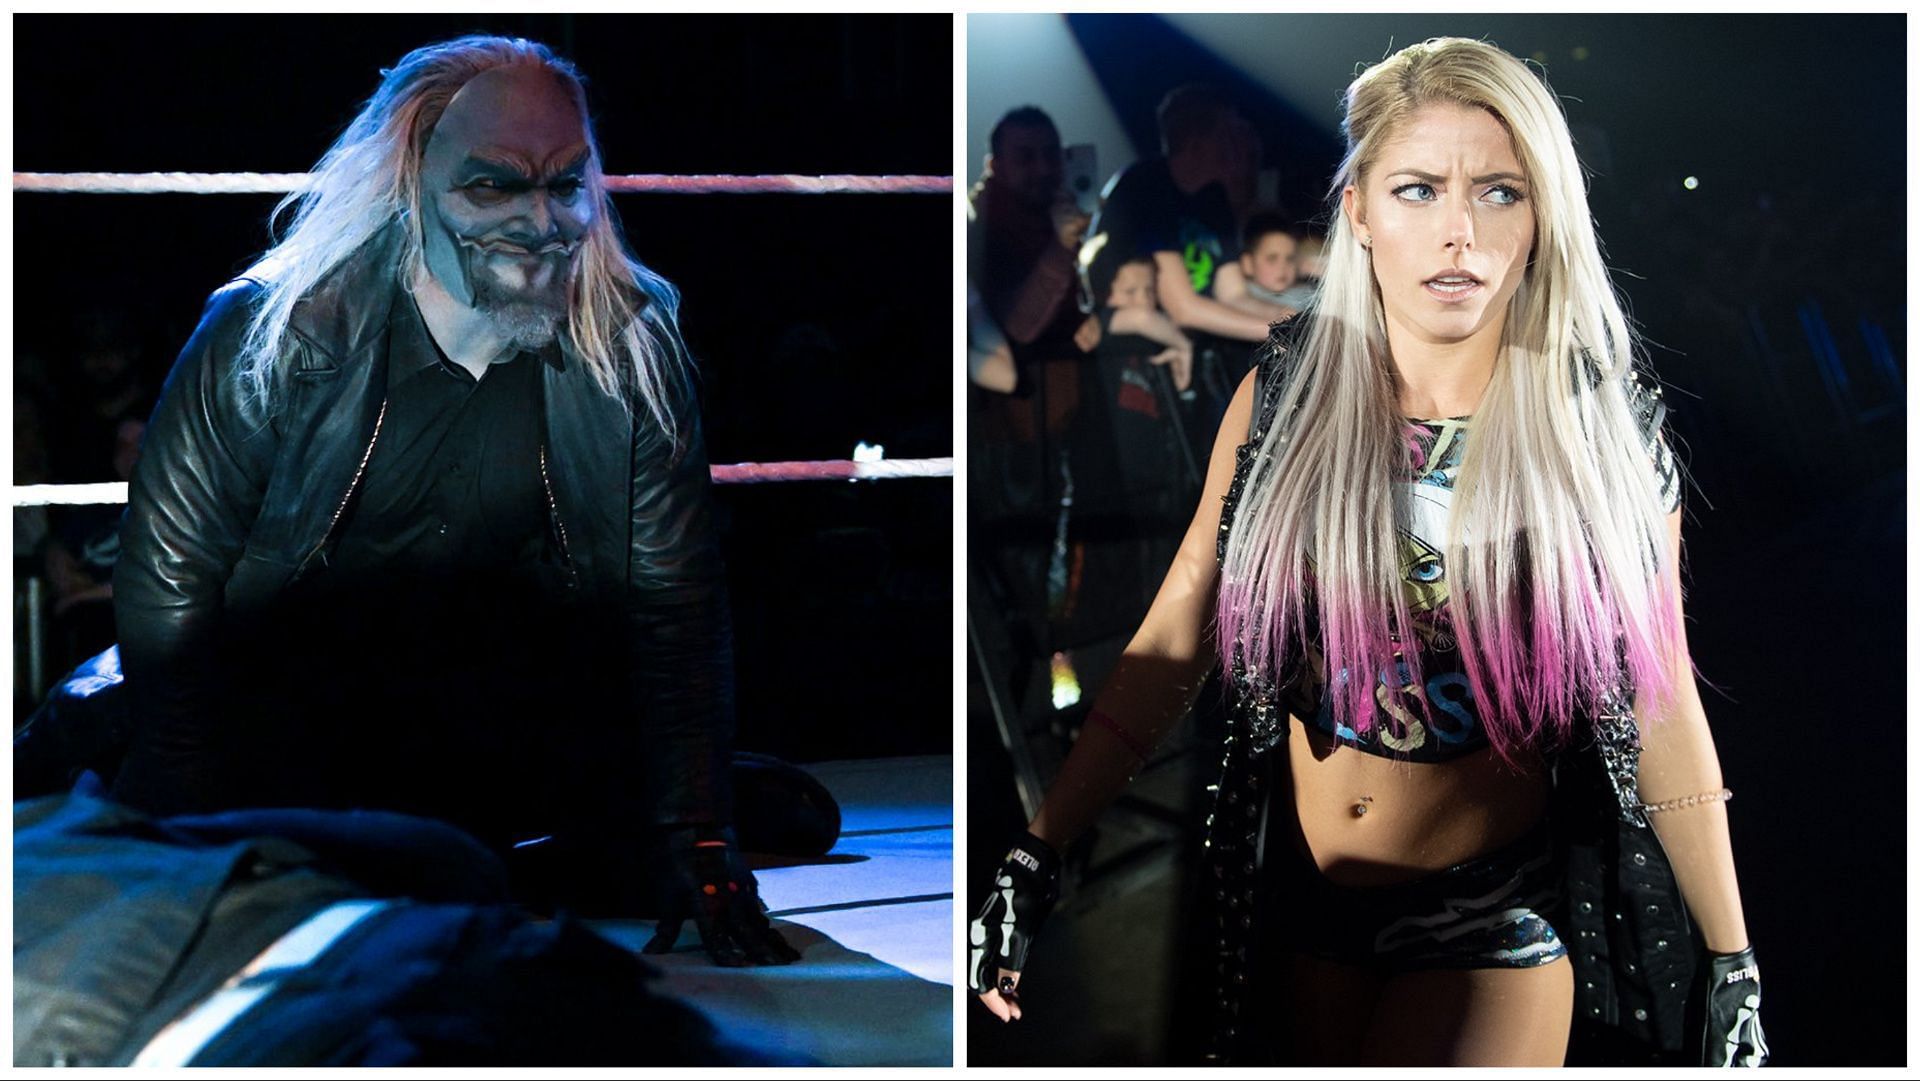 Uncle Howdy in the WWE ring, Alexa Bliss heads to the ring for a match